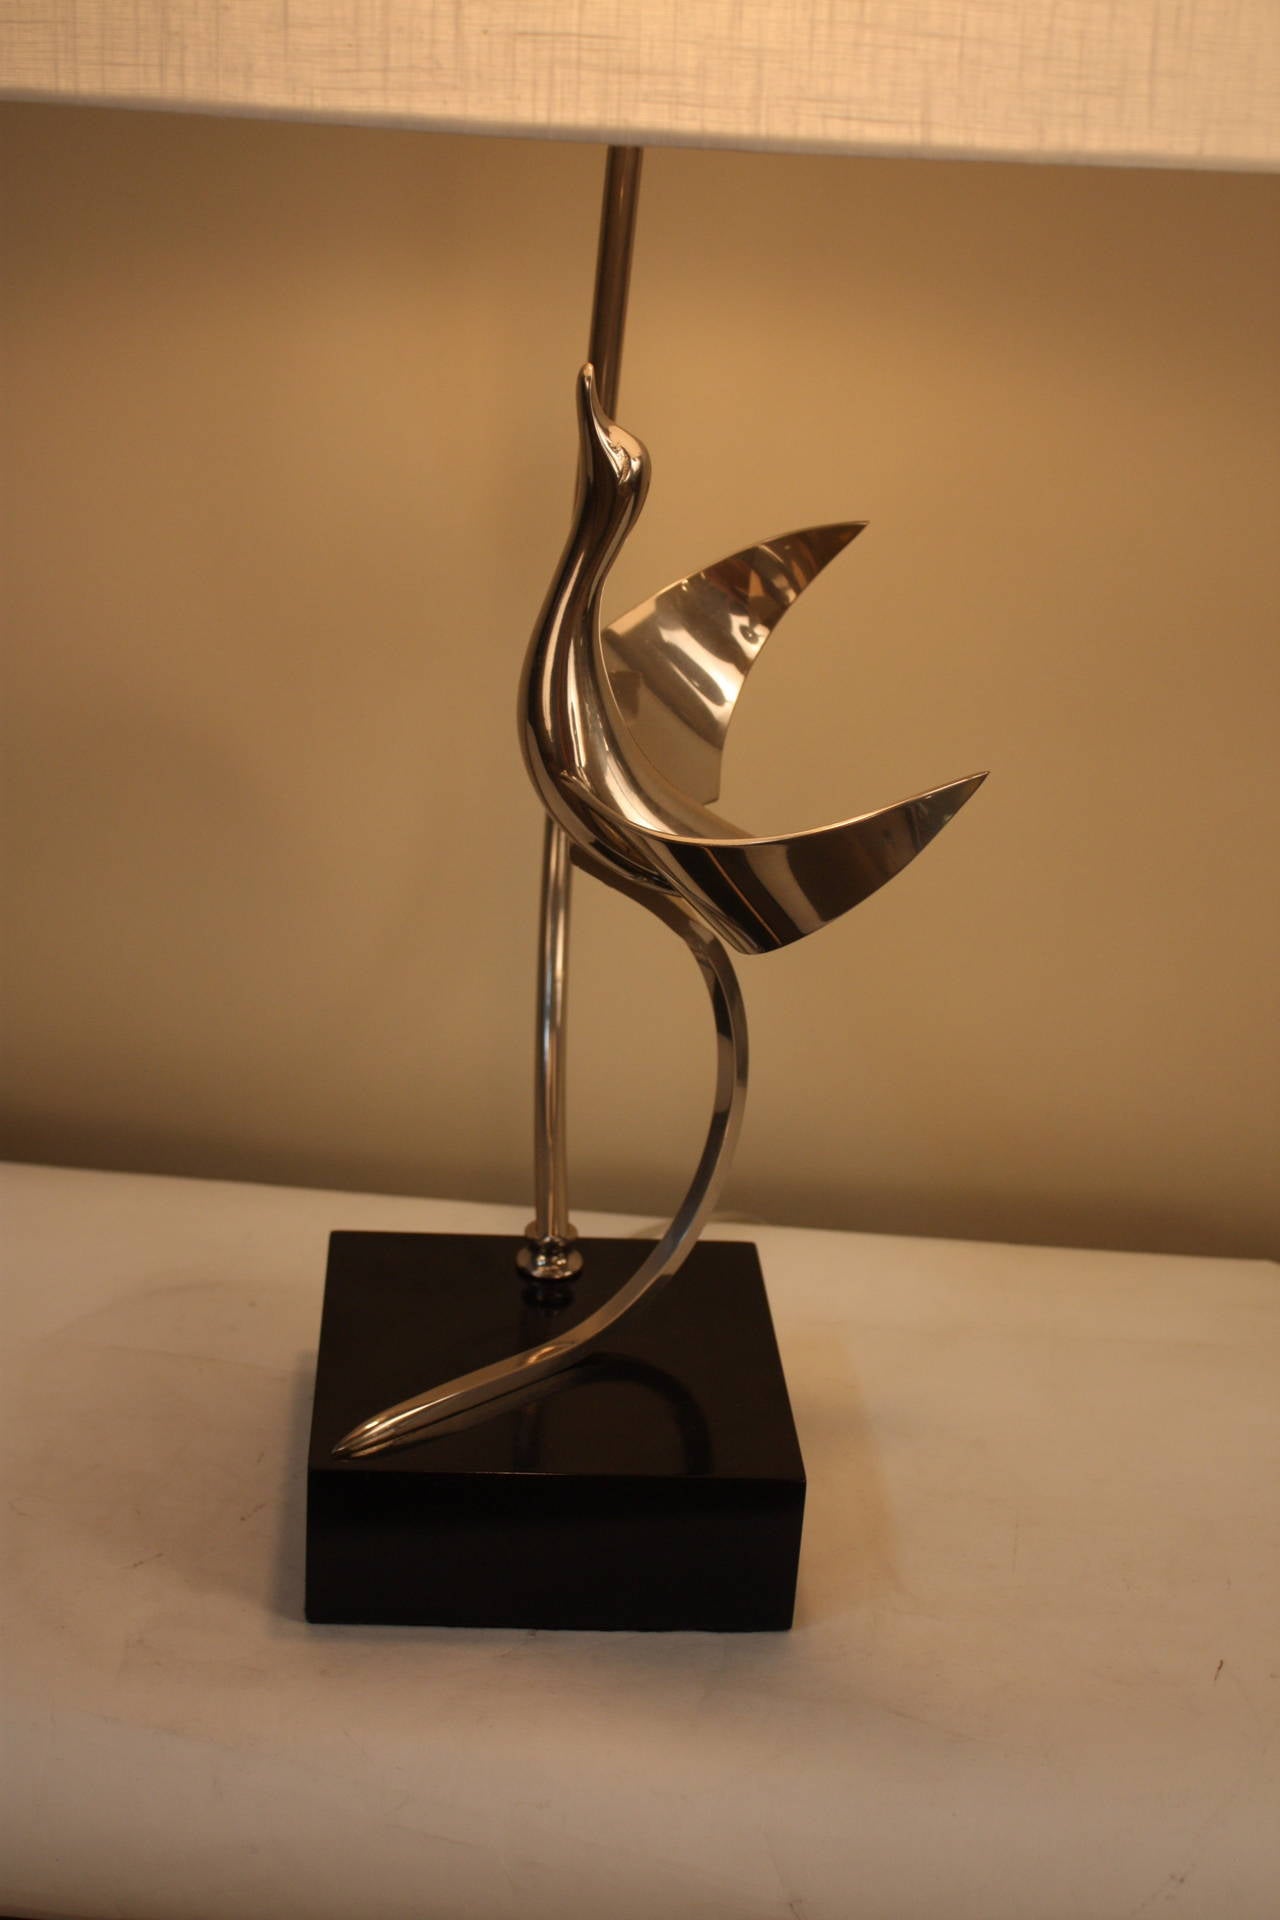 Lancia vintage flying bird nickel on bronze table lamp, Italian, 1960s. Modern bird sculptural beautifully flies against a black lacquered wooden base.